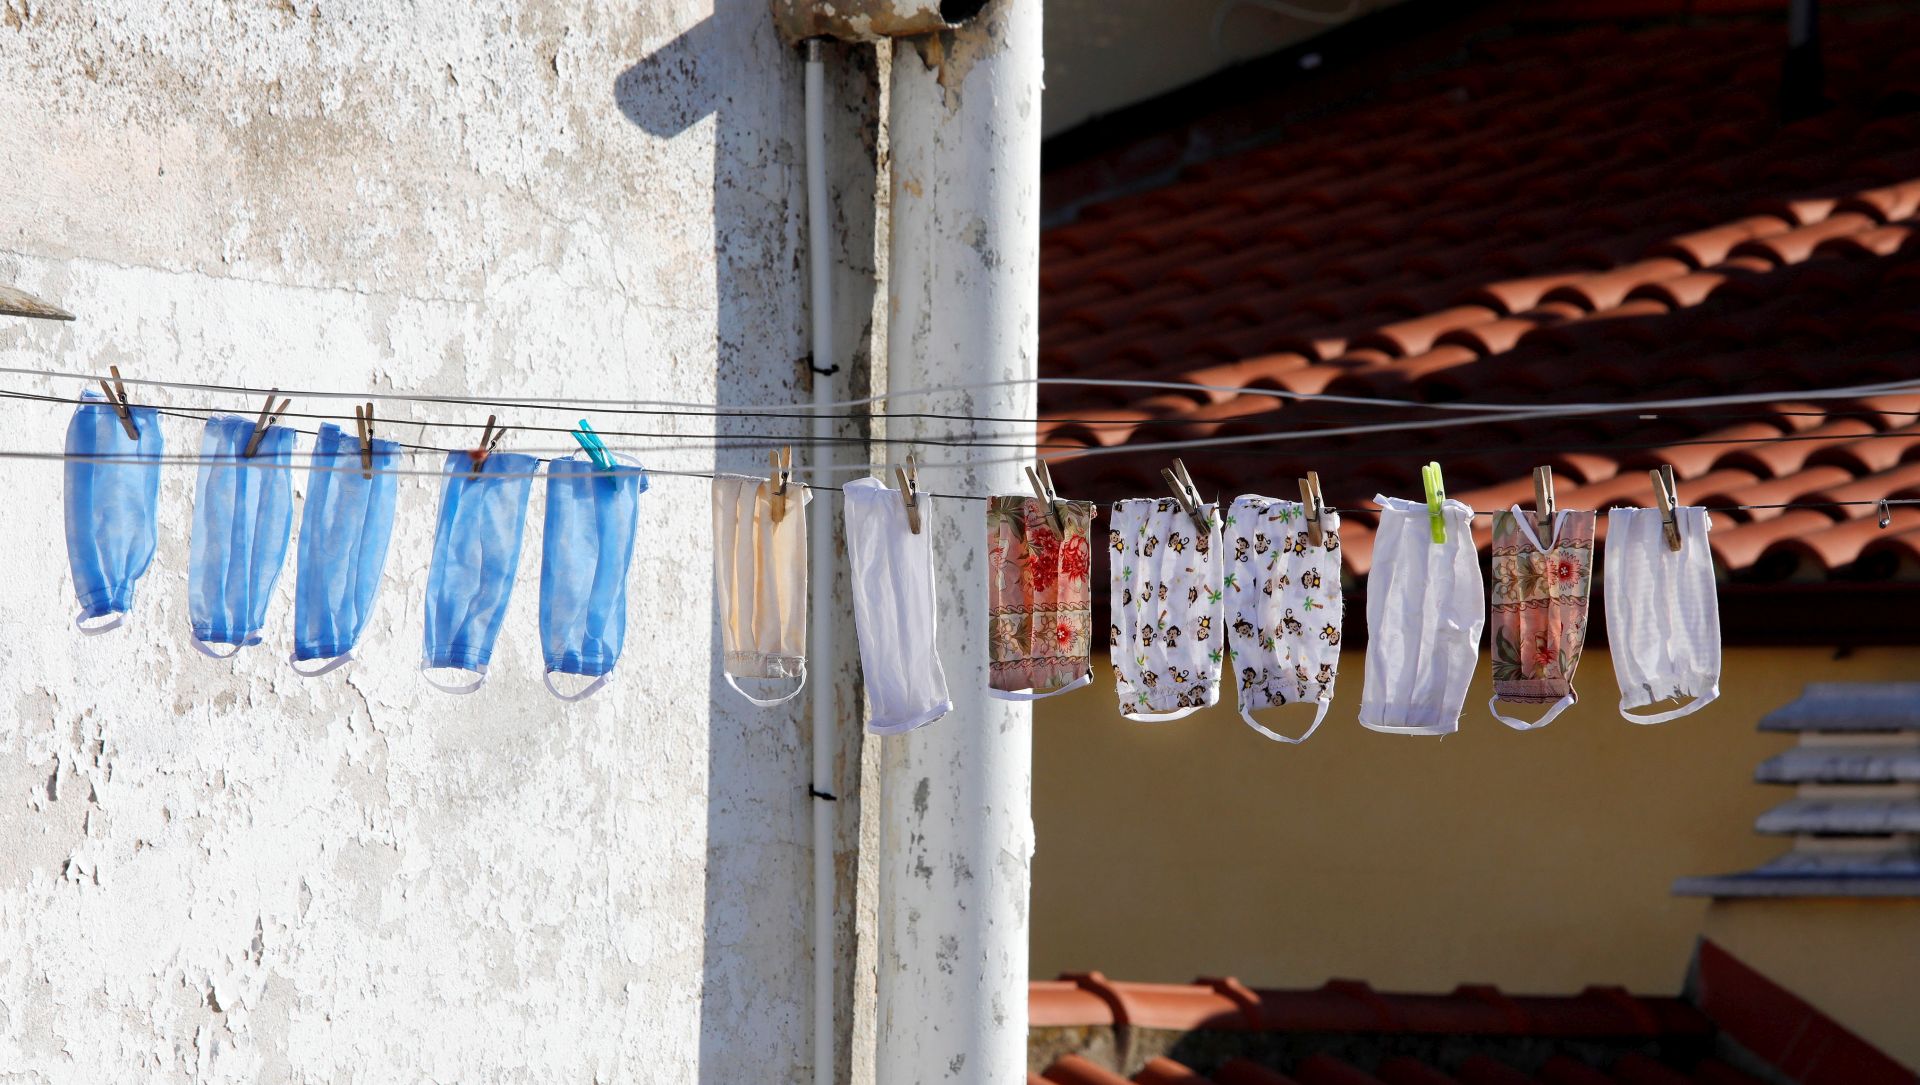 epa08350553 Facial masks are seen hanged out in Montbui, Barcelona, Spain, 08 April 2020. Spain faces the 25th consecutive day of mandatory home confinement in a bid to slow down the spread of the pandemic COVID-19 disease caused by the SARS-CoV-2 coronavirus.  EPA/Susanna Saez